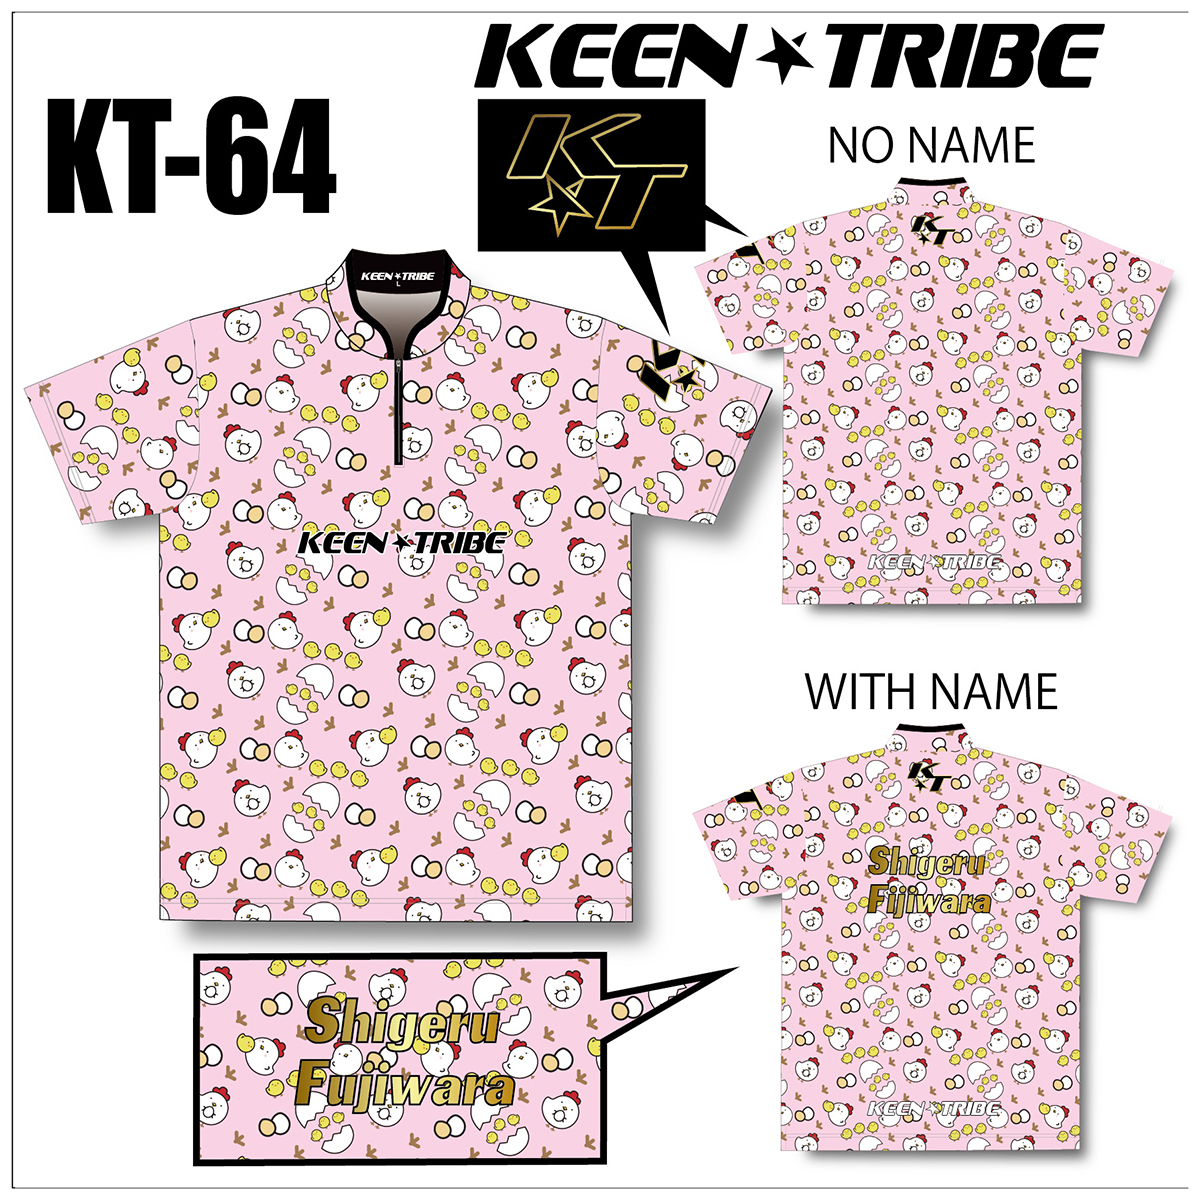 KEEN ★ TRIBE　KT-64(受注生産)